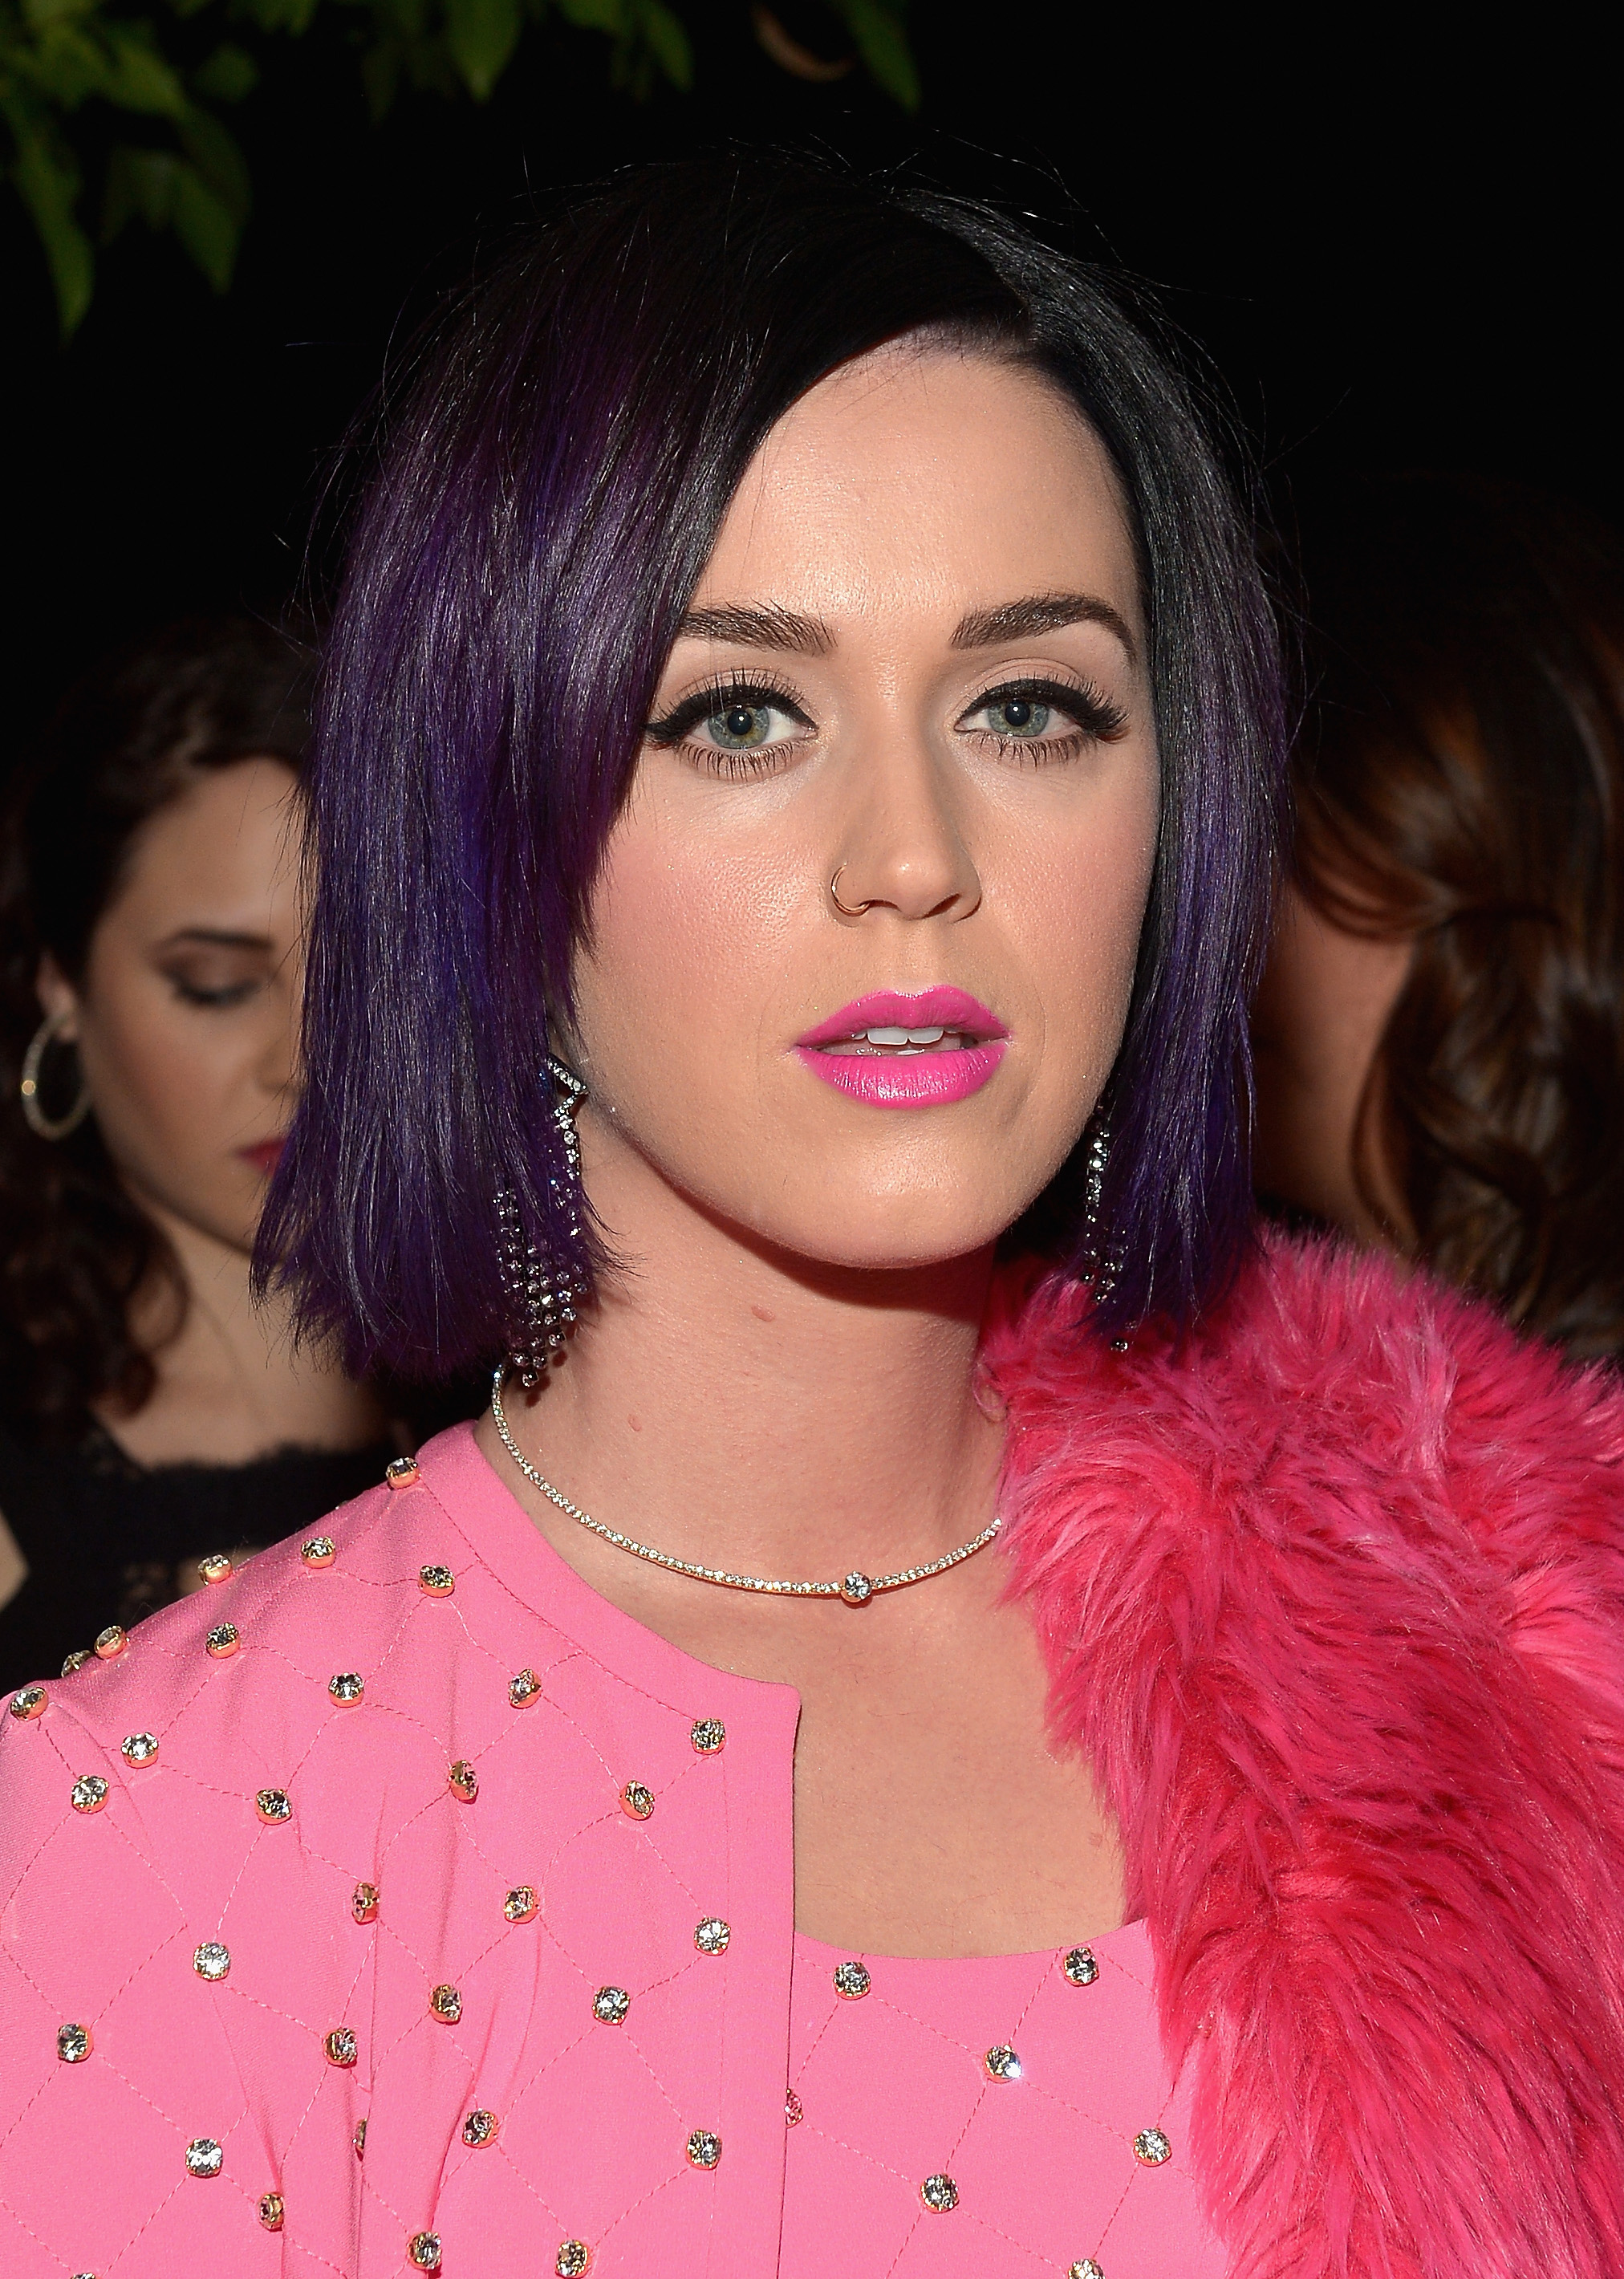 Katy Perry attends the 'Fashion Los Angeles Awards' Show on Jan. 22, 2015 in West Hollywood, California.